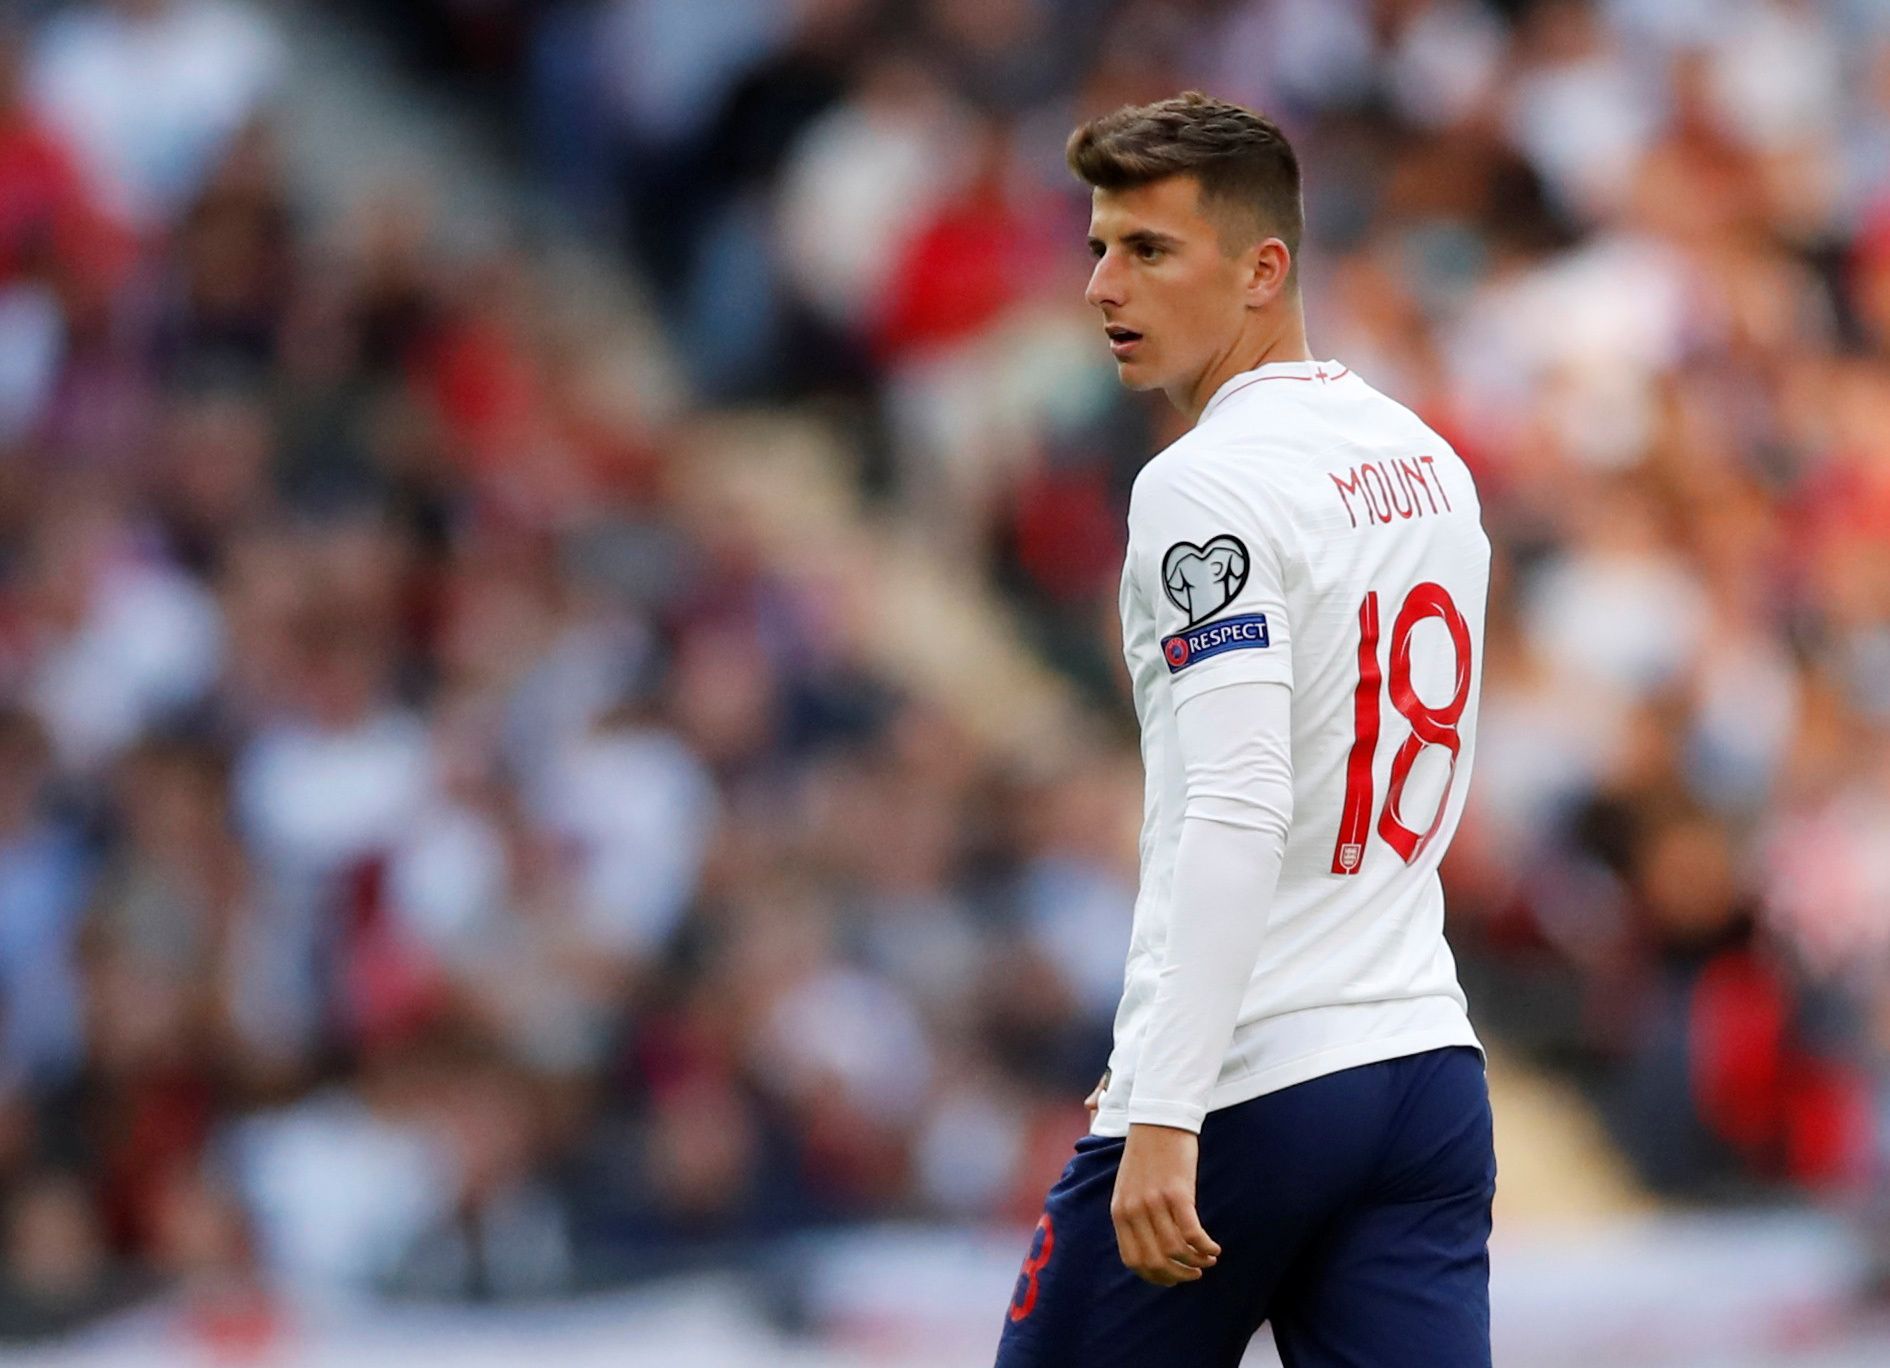 Soccer Football - Euro 2020 Qualifier - Group A - England v Bulgaria - Wembley Stadium, London, Britain - September 7, 2019  England's Mason Mount during the match           Action Images via Reuters/Andrew Boyers